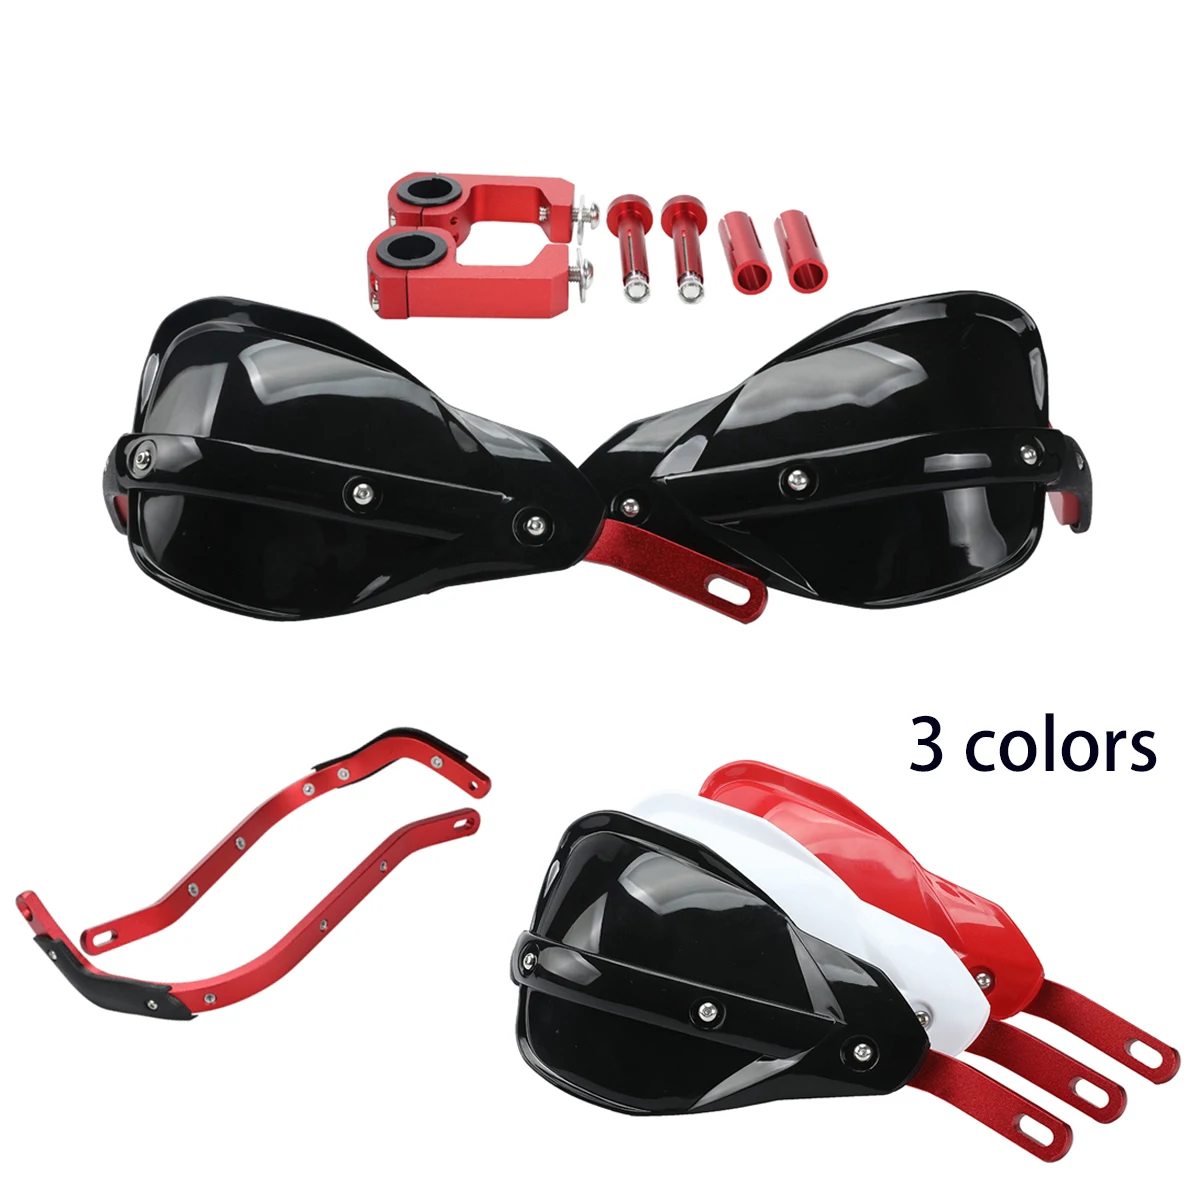 

Universal Motorcycle Hand Guards Handguard Protector For CR CRF YZ YZF KLX KXF SXF EXC XCW Dirt Bike Motocross Off Road ATV Quad